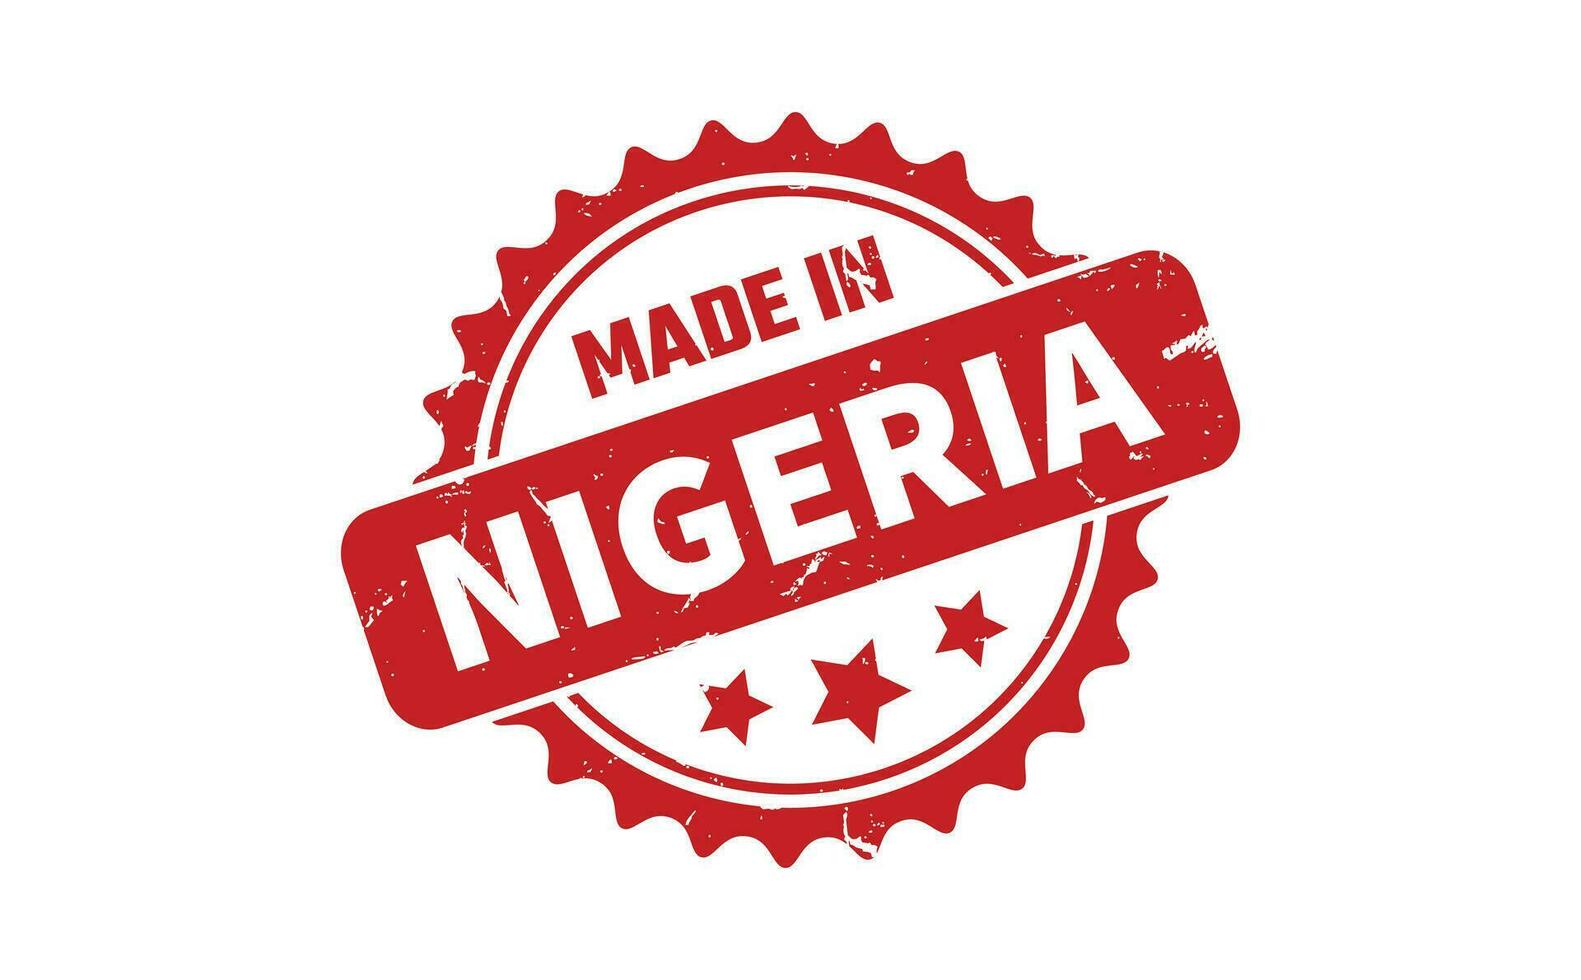 Made In Nigeria Rubber Stamp vector